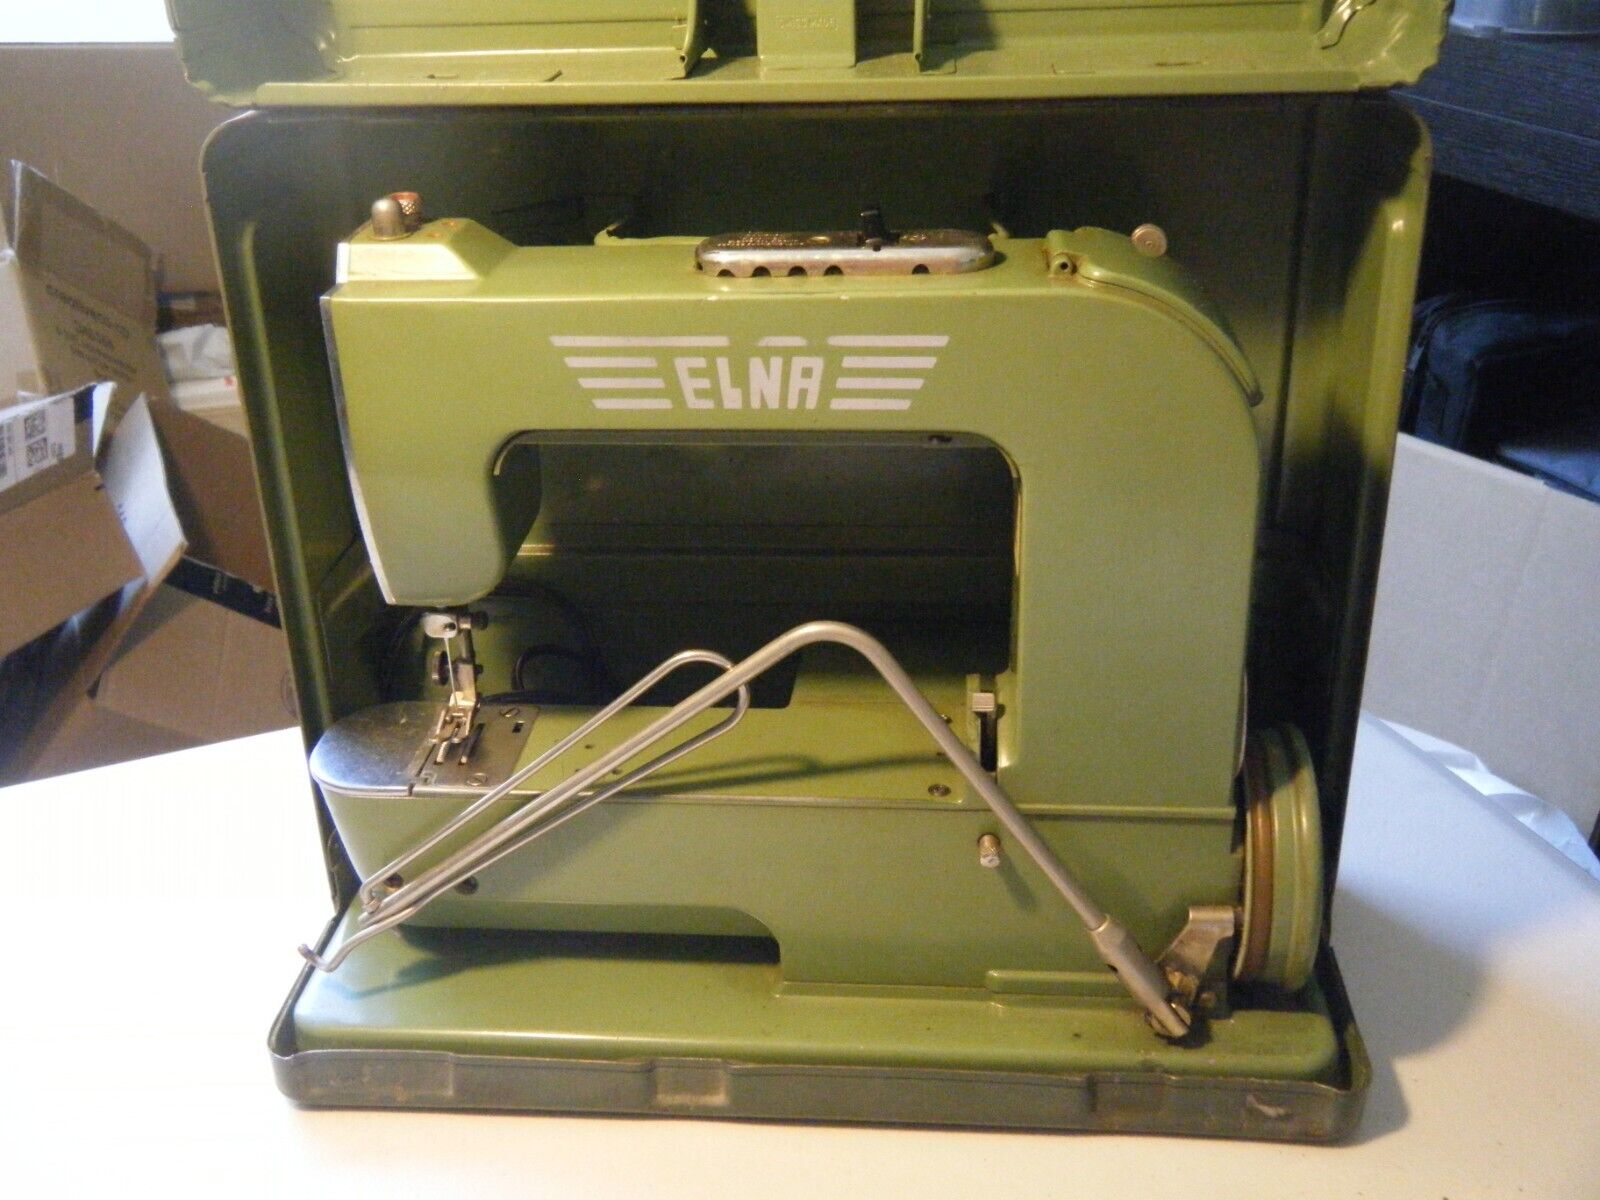 Vintage Elna Swiss Grasshopper sewing machine with metal carrying case